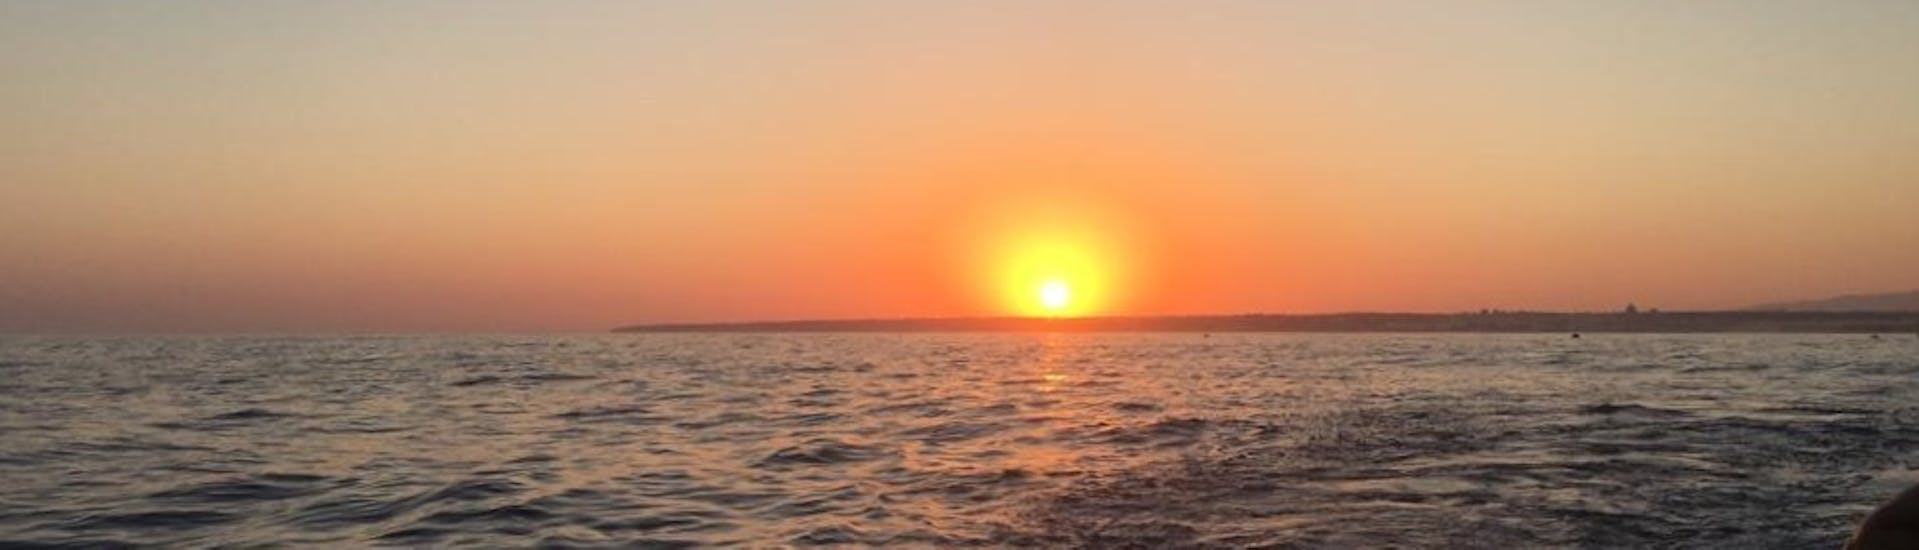 The sunset over the sea seen during the Catamaran Trip at Sunset to the Benagil Cave with Kayak or SUP with SeaAlgarve Albufeira.